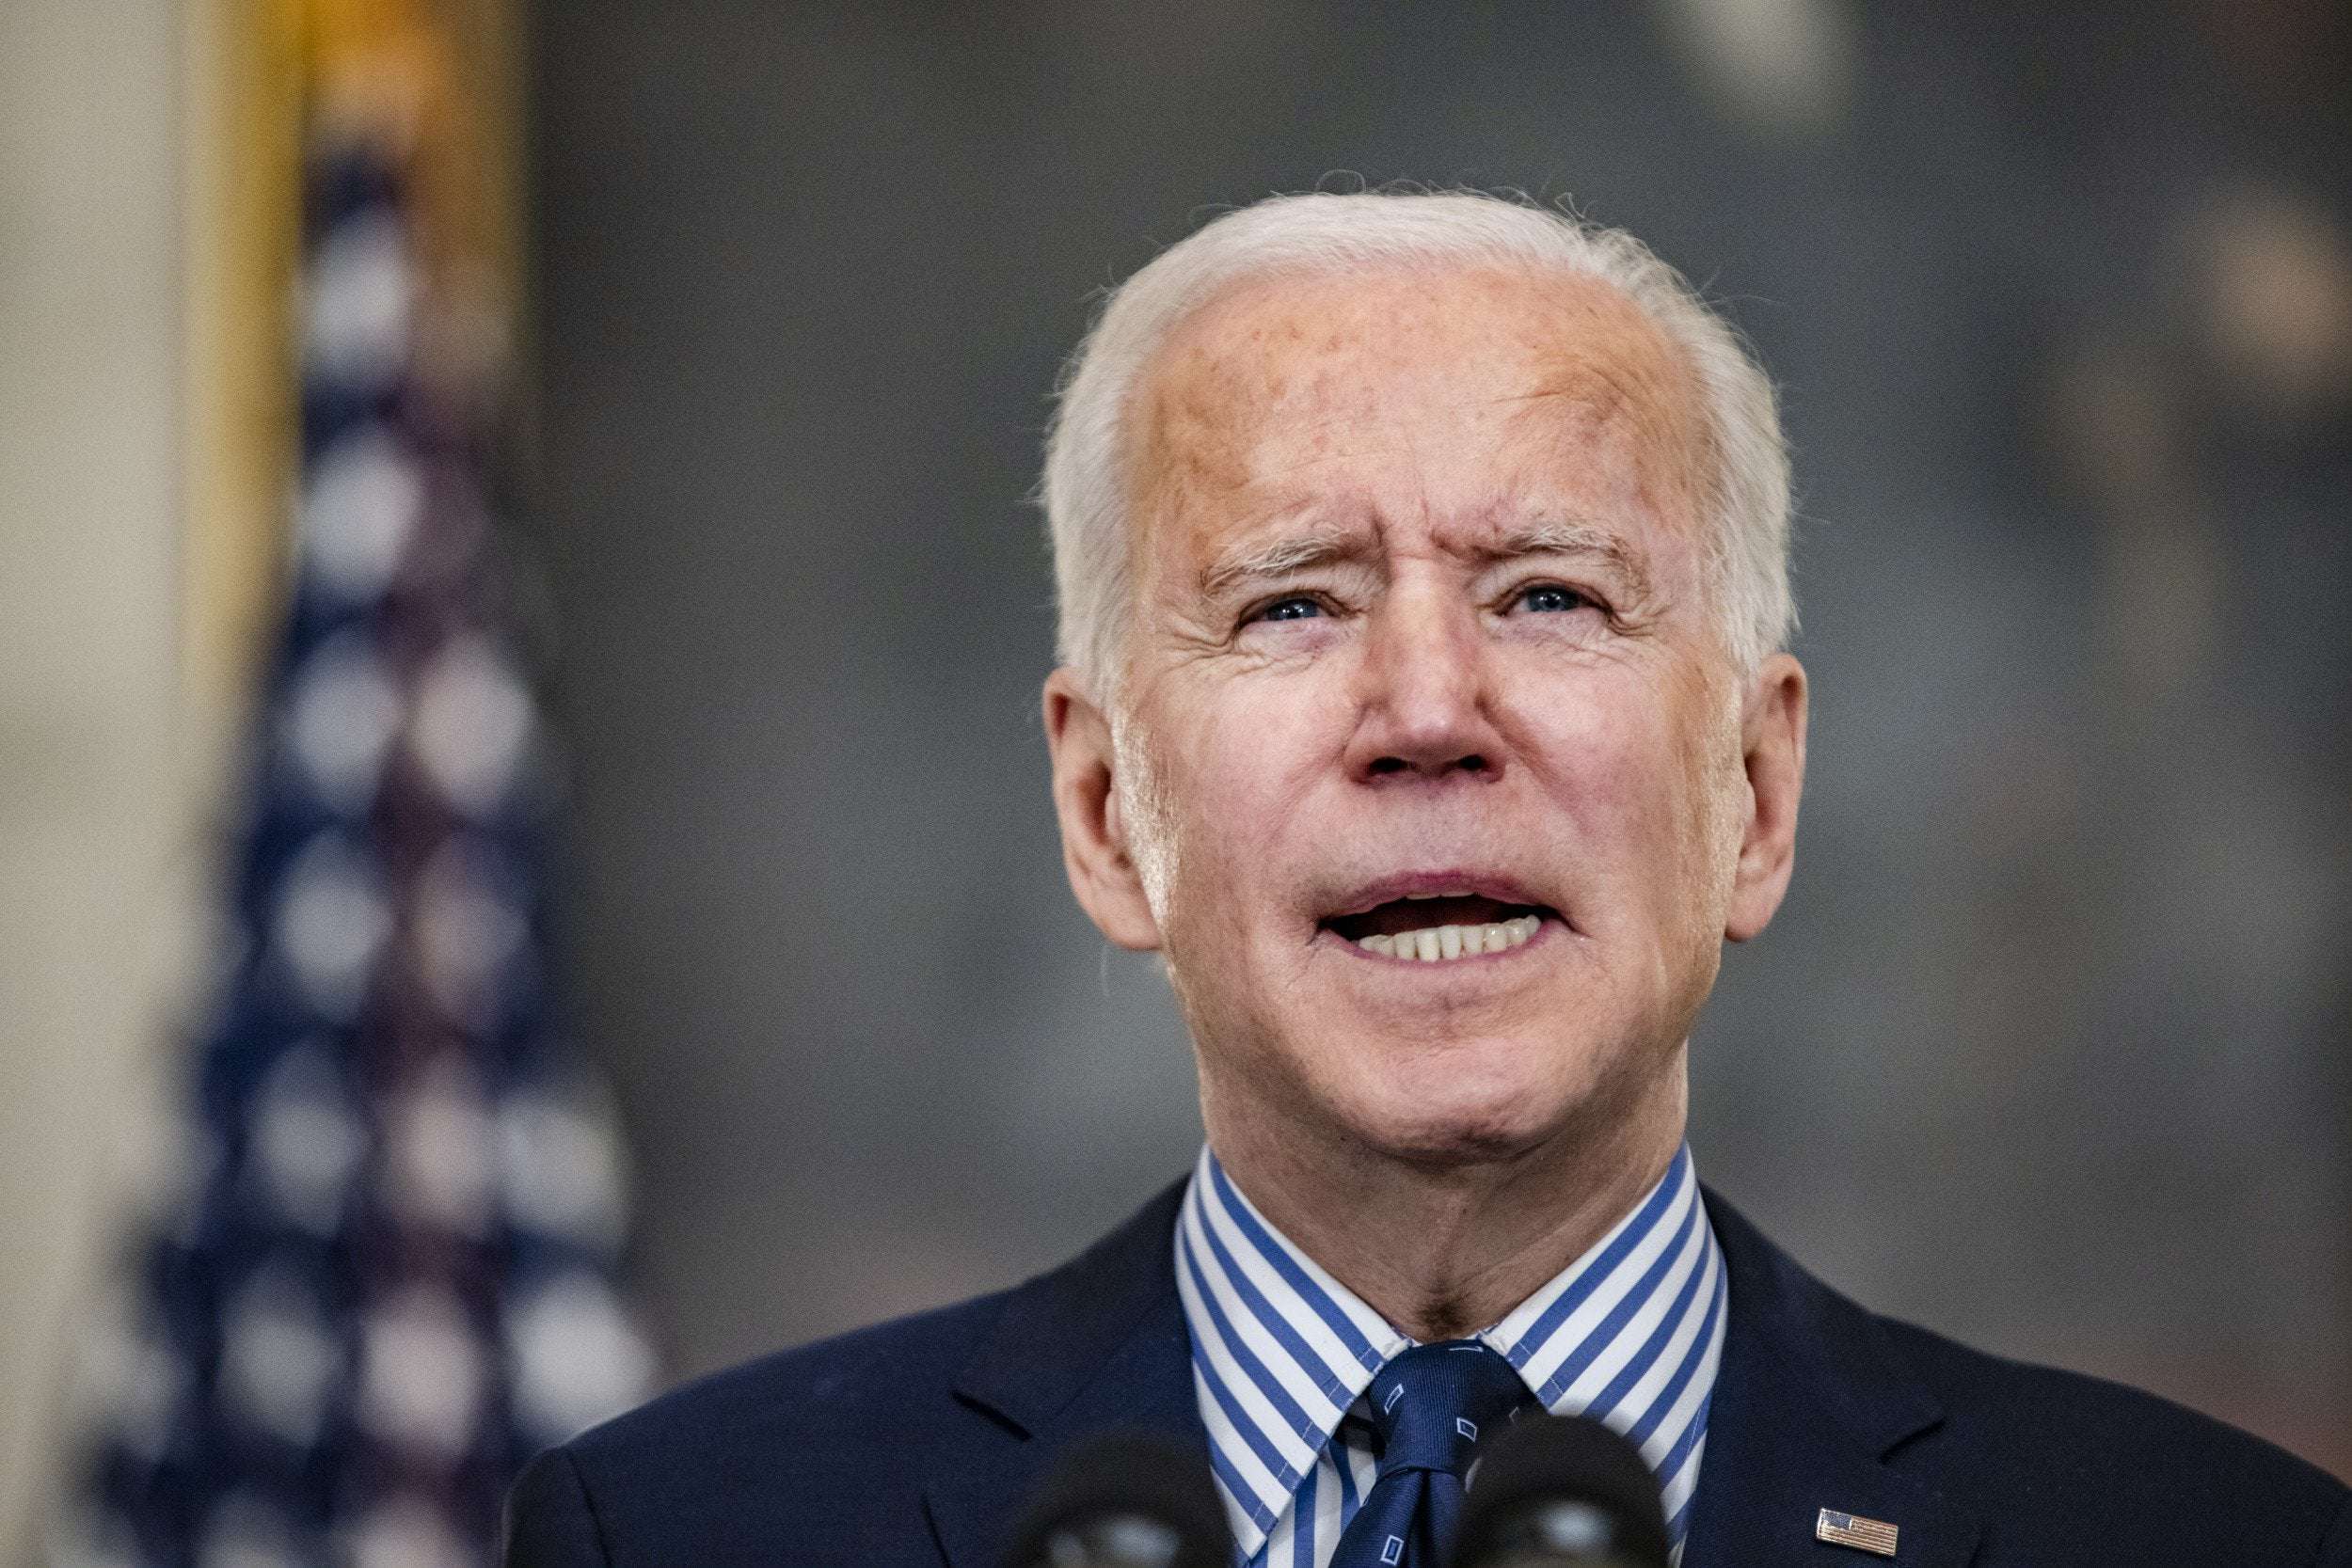 image for 68% of Americans Support Biden's Pandemic Response, Most Say Lifting Restrictions Too Fast: Poll